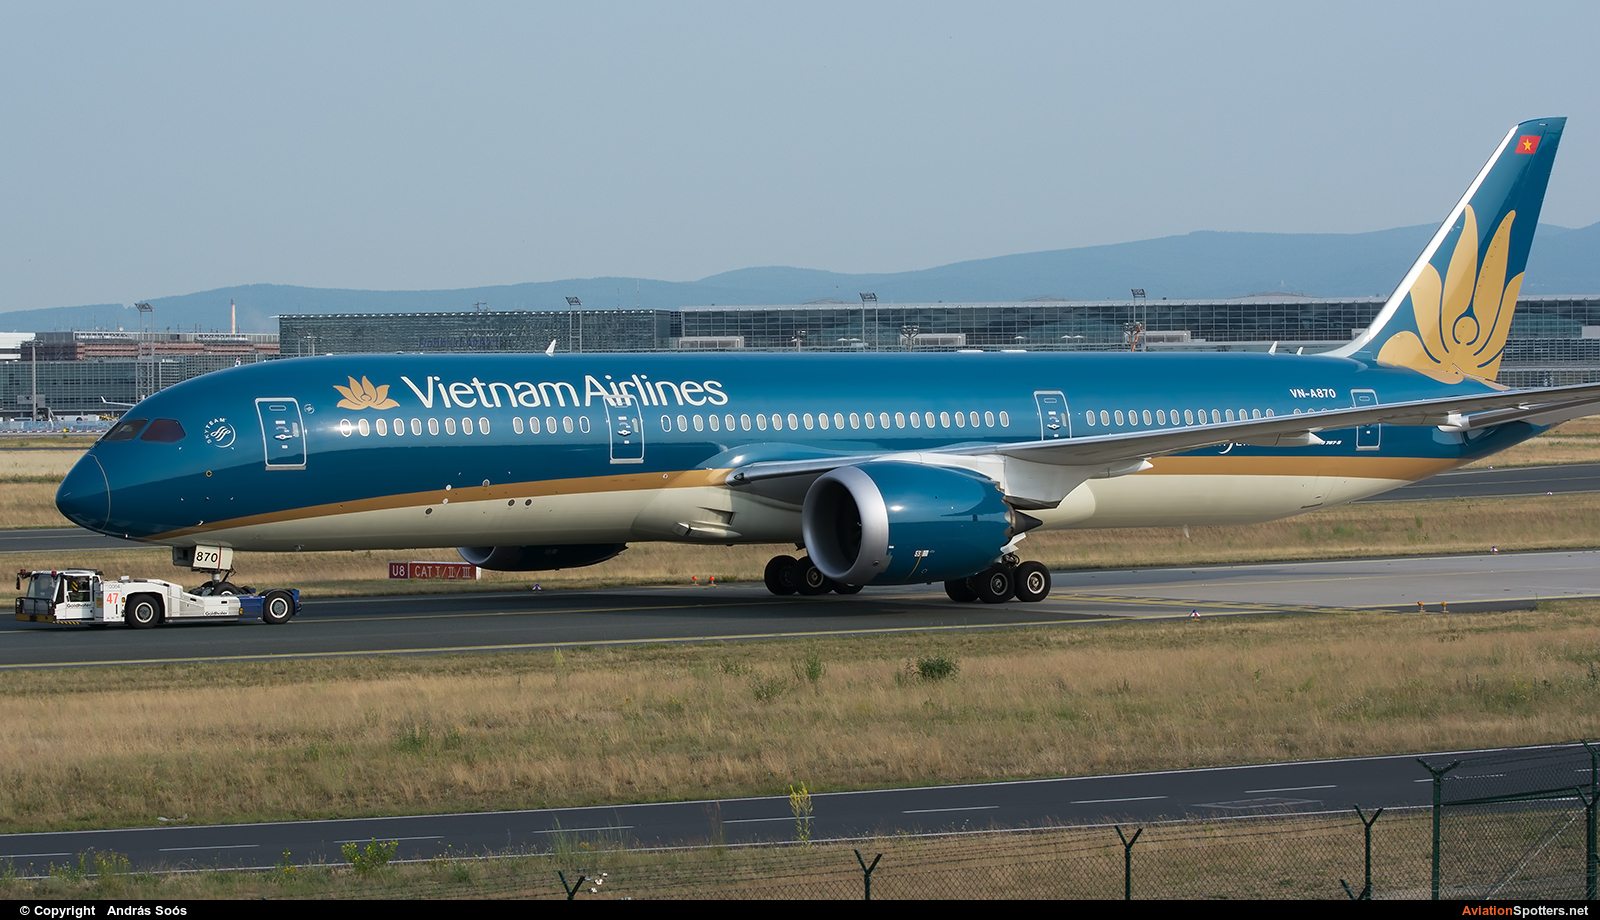 Vietnam Airlines  -  787-9 Dreamliner  (VN-A870) By András Soós (sas1965)